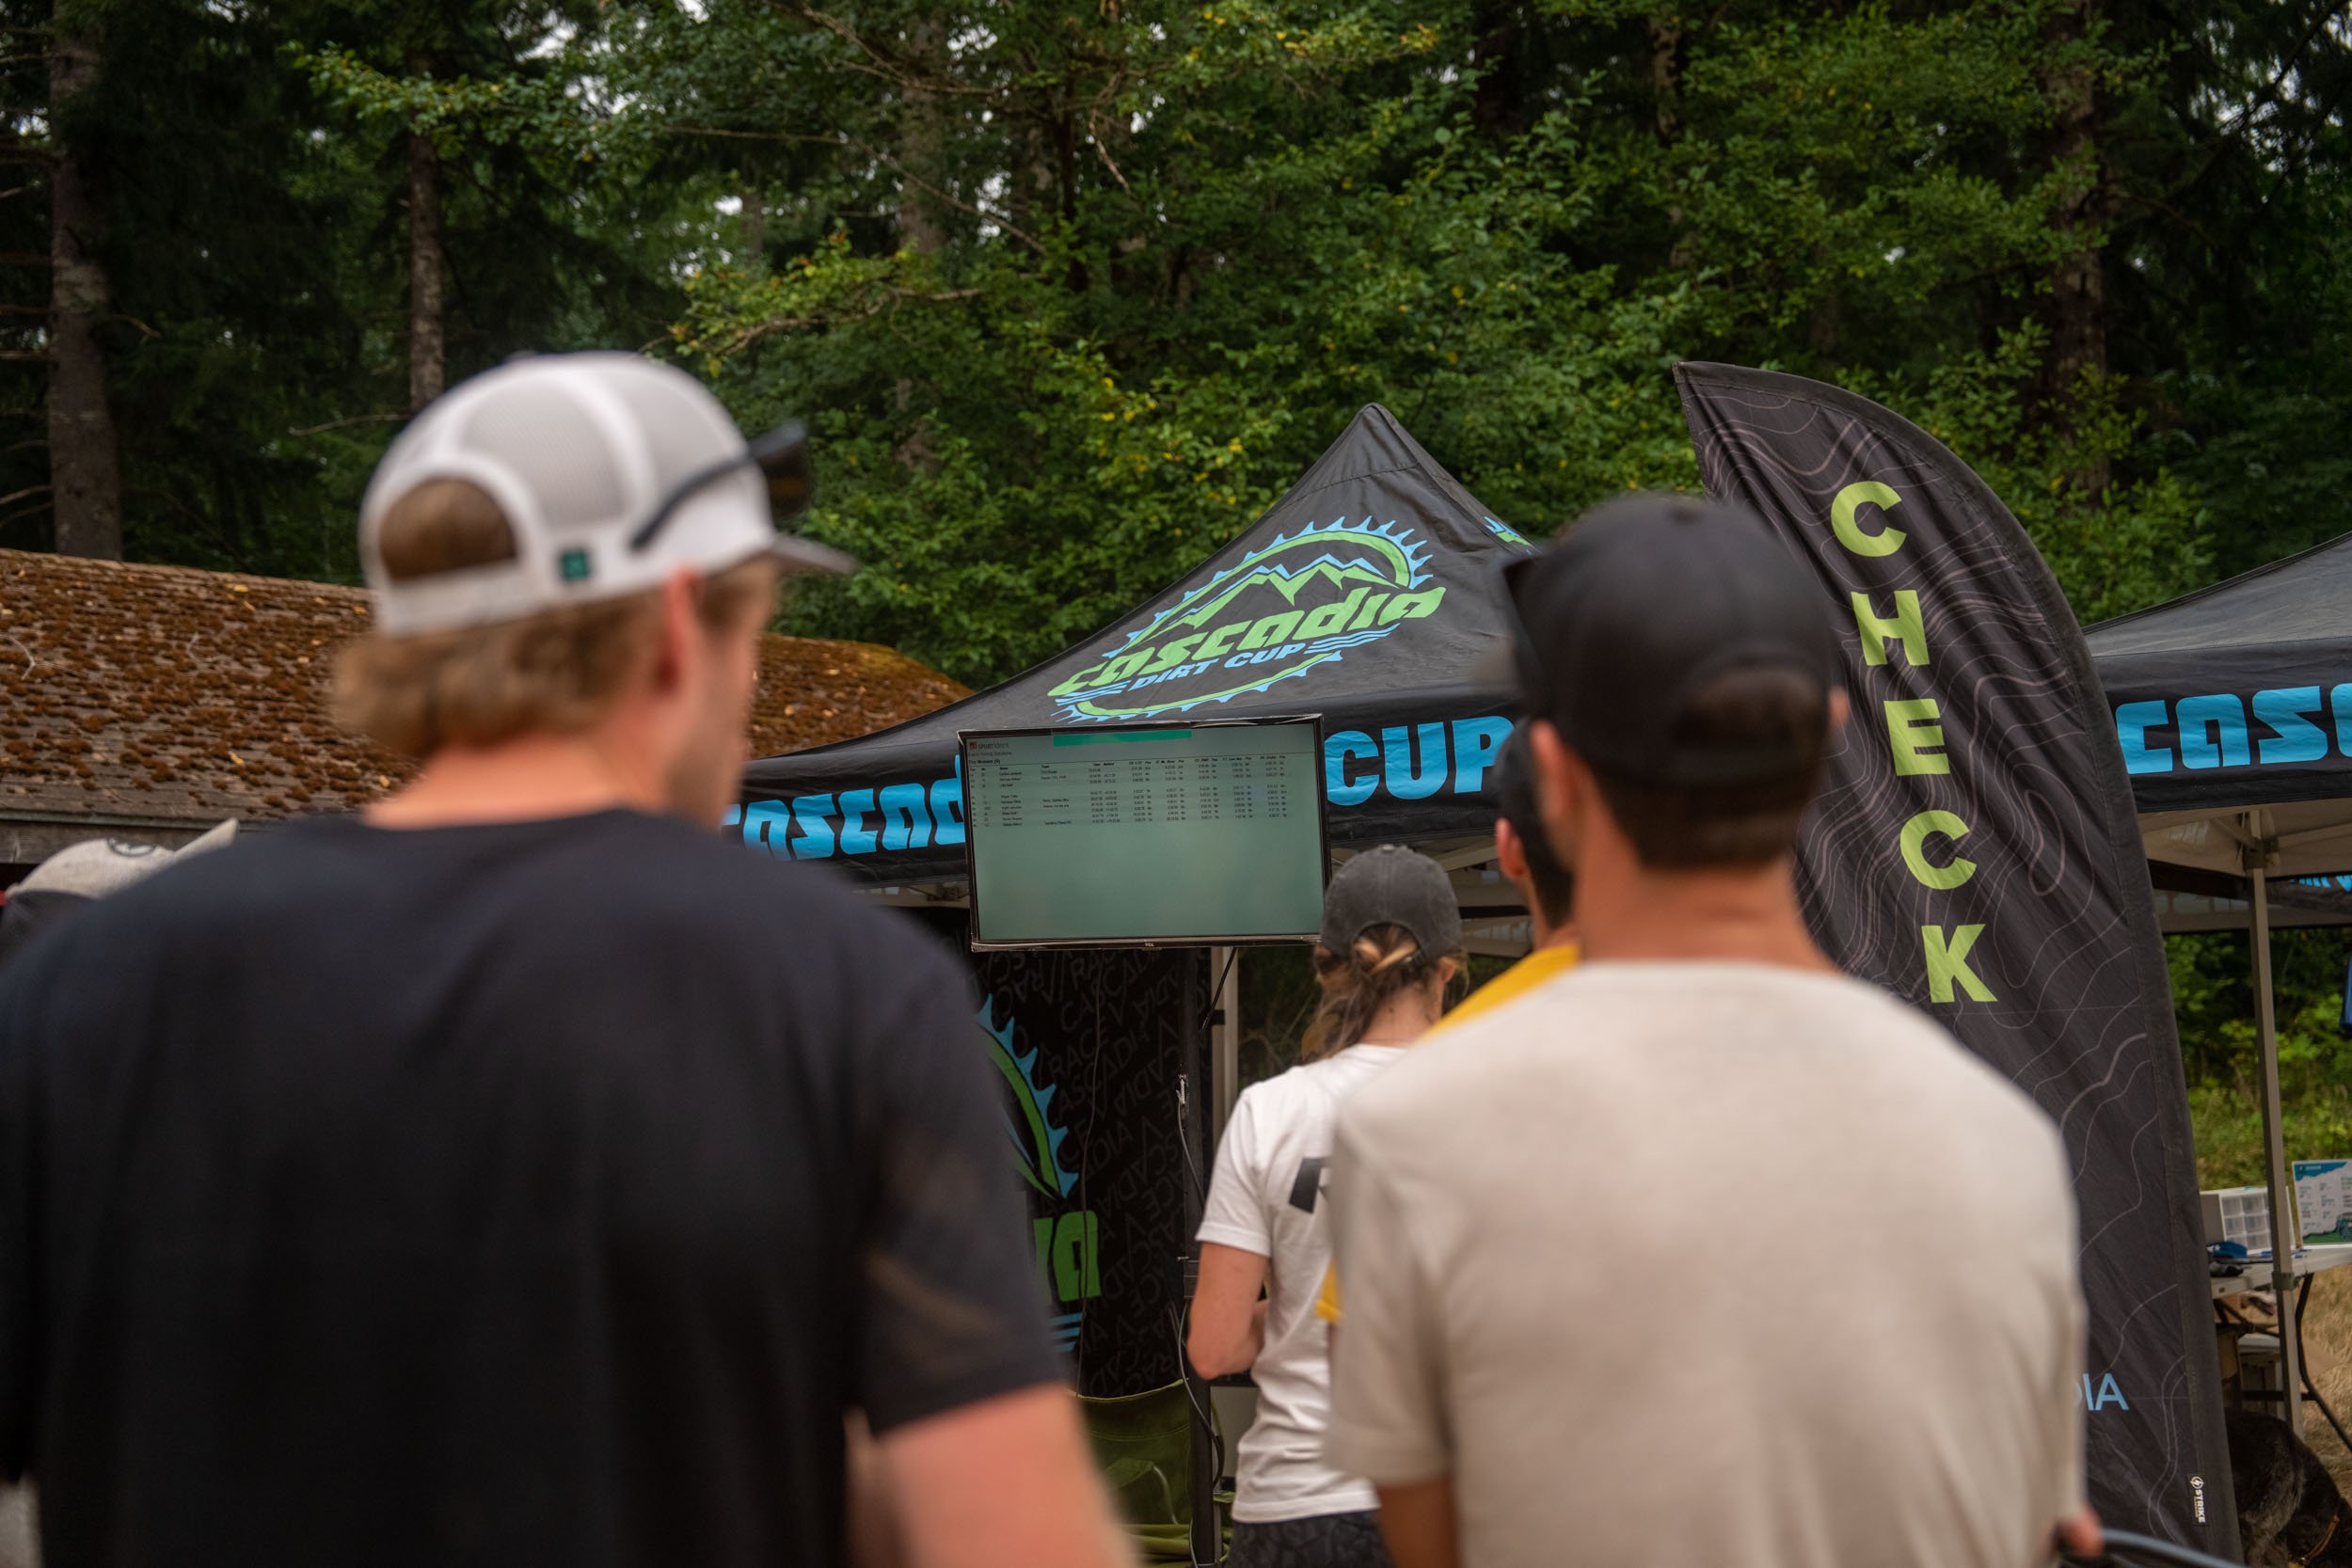 Cascadia_Dirt_Cup_North_Slope_84.jpg